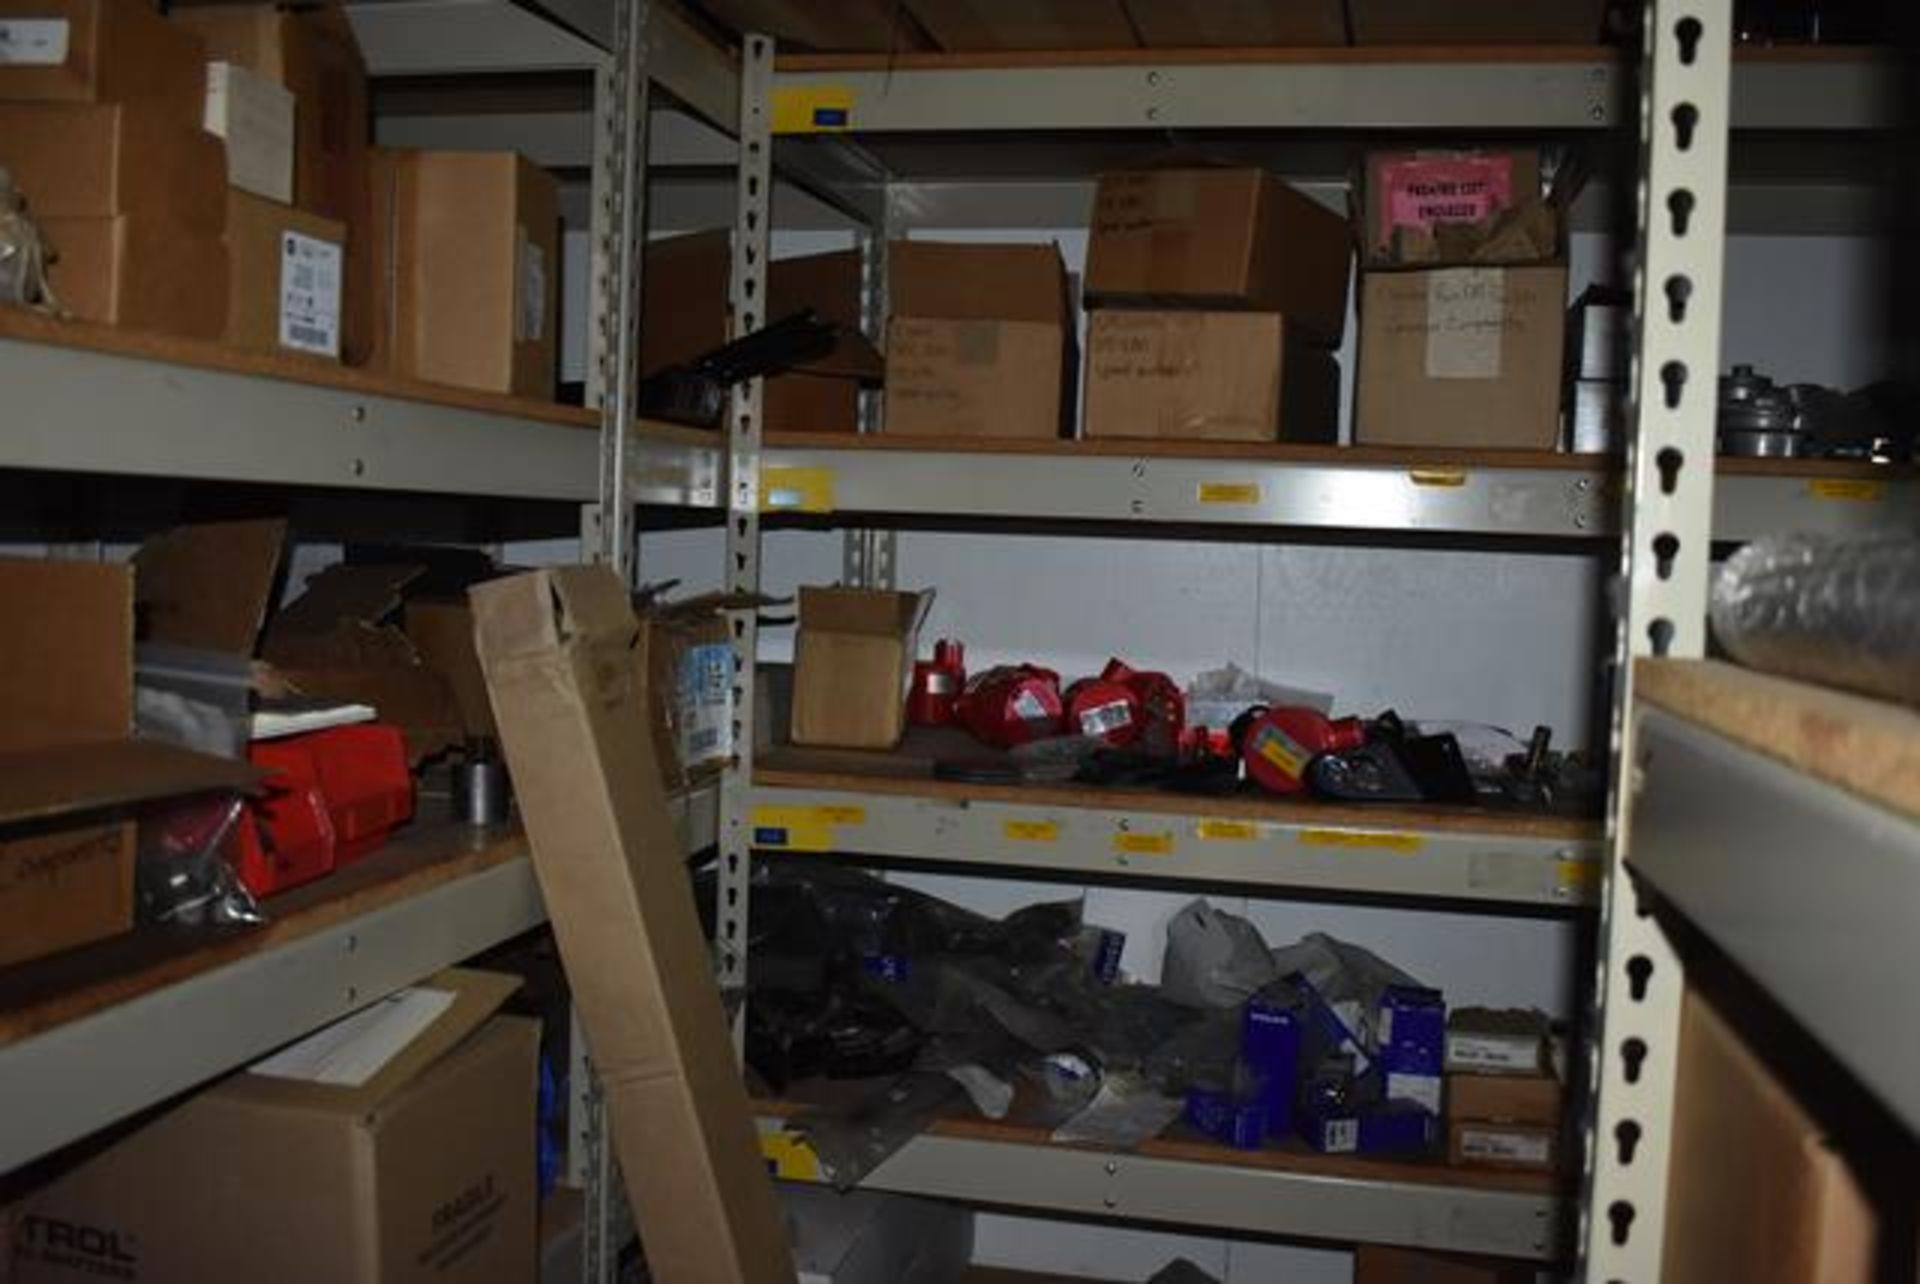 Stores Area Contents - (12) Shelf Sections, Bearings, Burner Parts, Eaton/Allen Bradley Electrical - Image 5 of 7